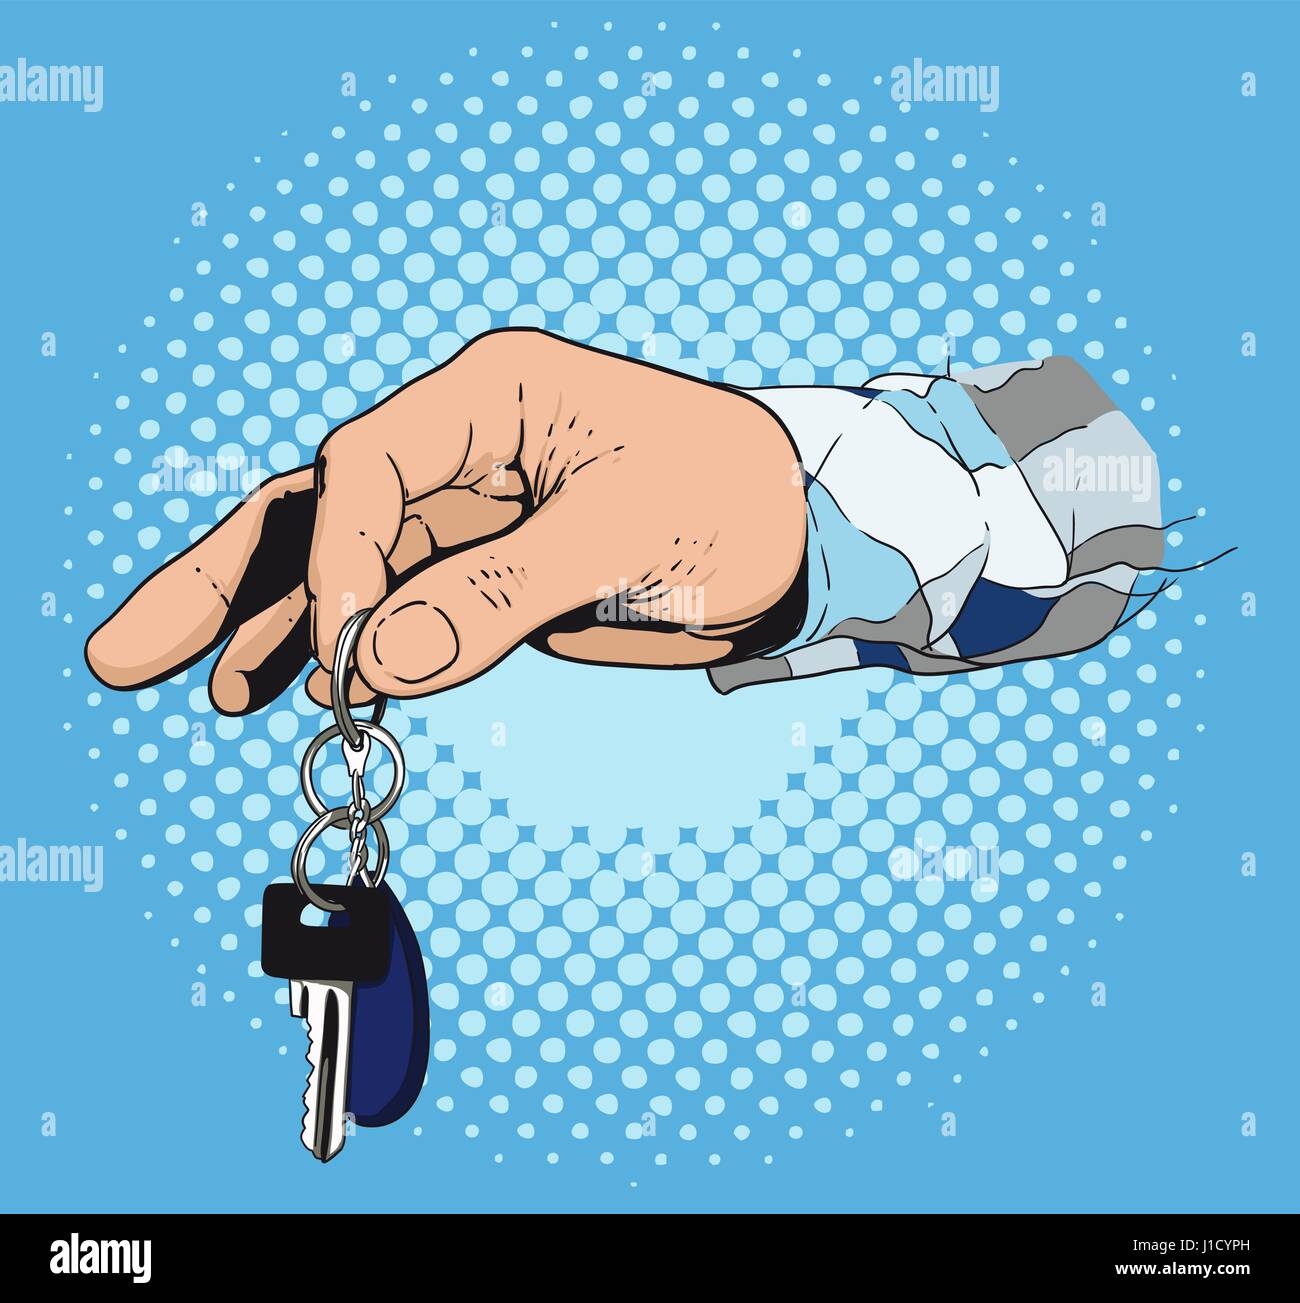 Hand giving the key Stock Vector